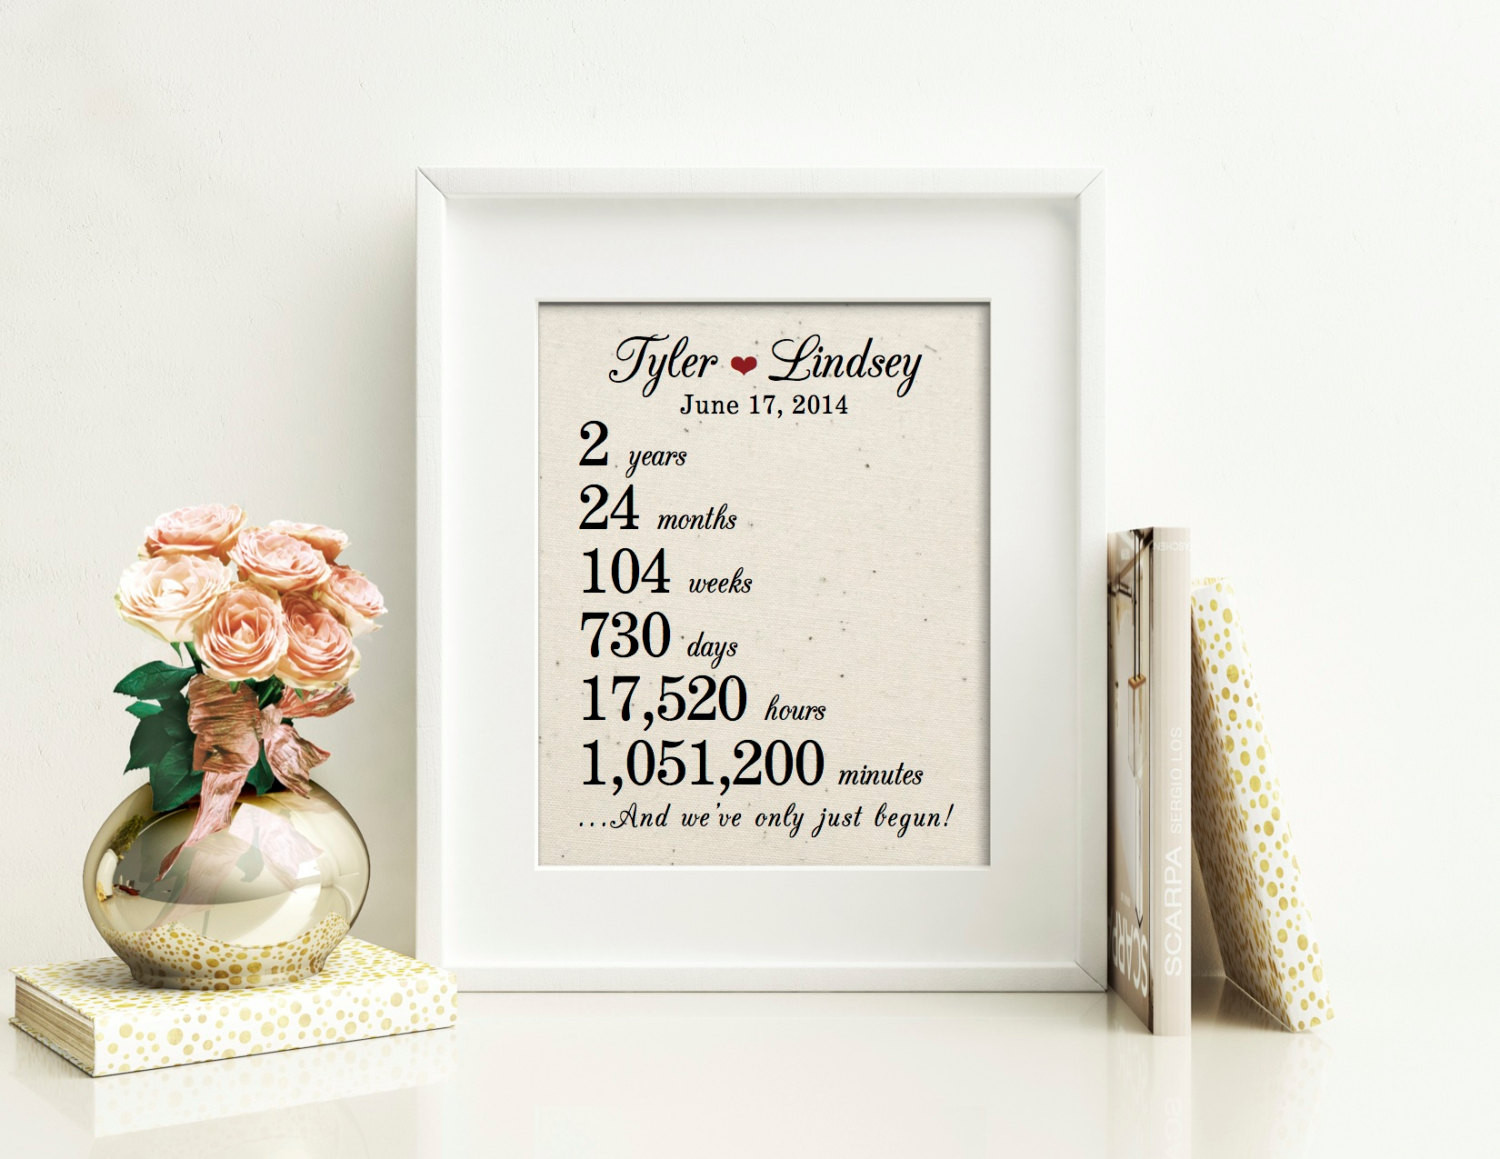 Second Anniversary Gift Ideas
 2nd Anniversary Gift Cotton Anniversary Gift for Husband